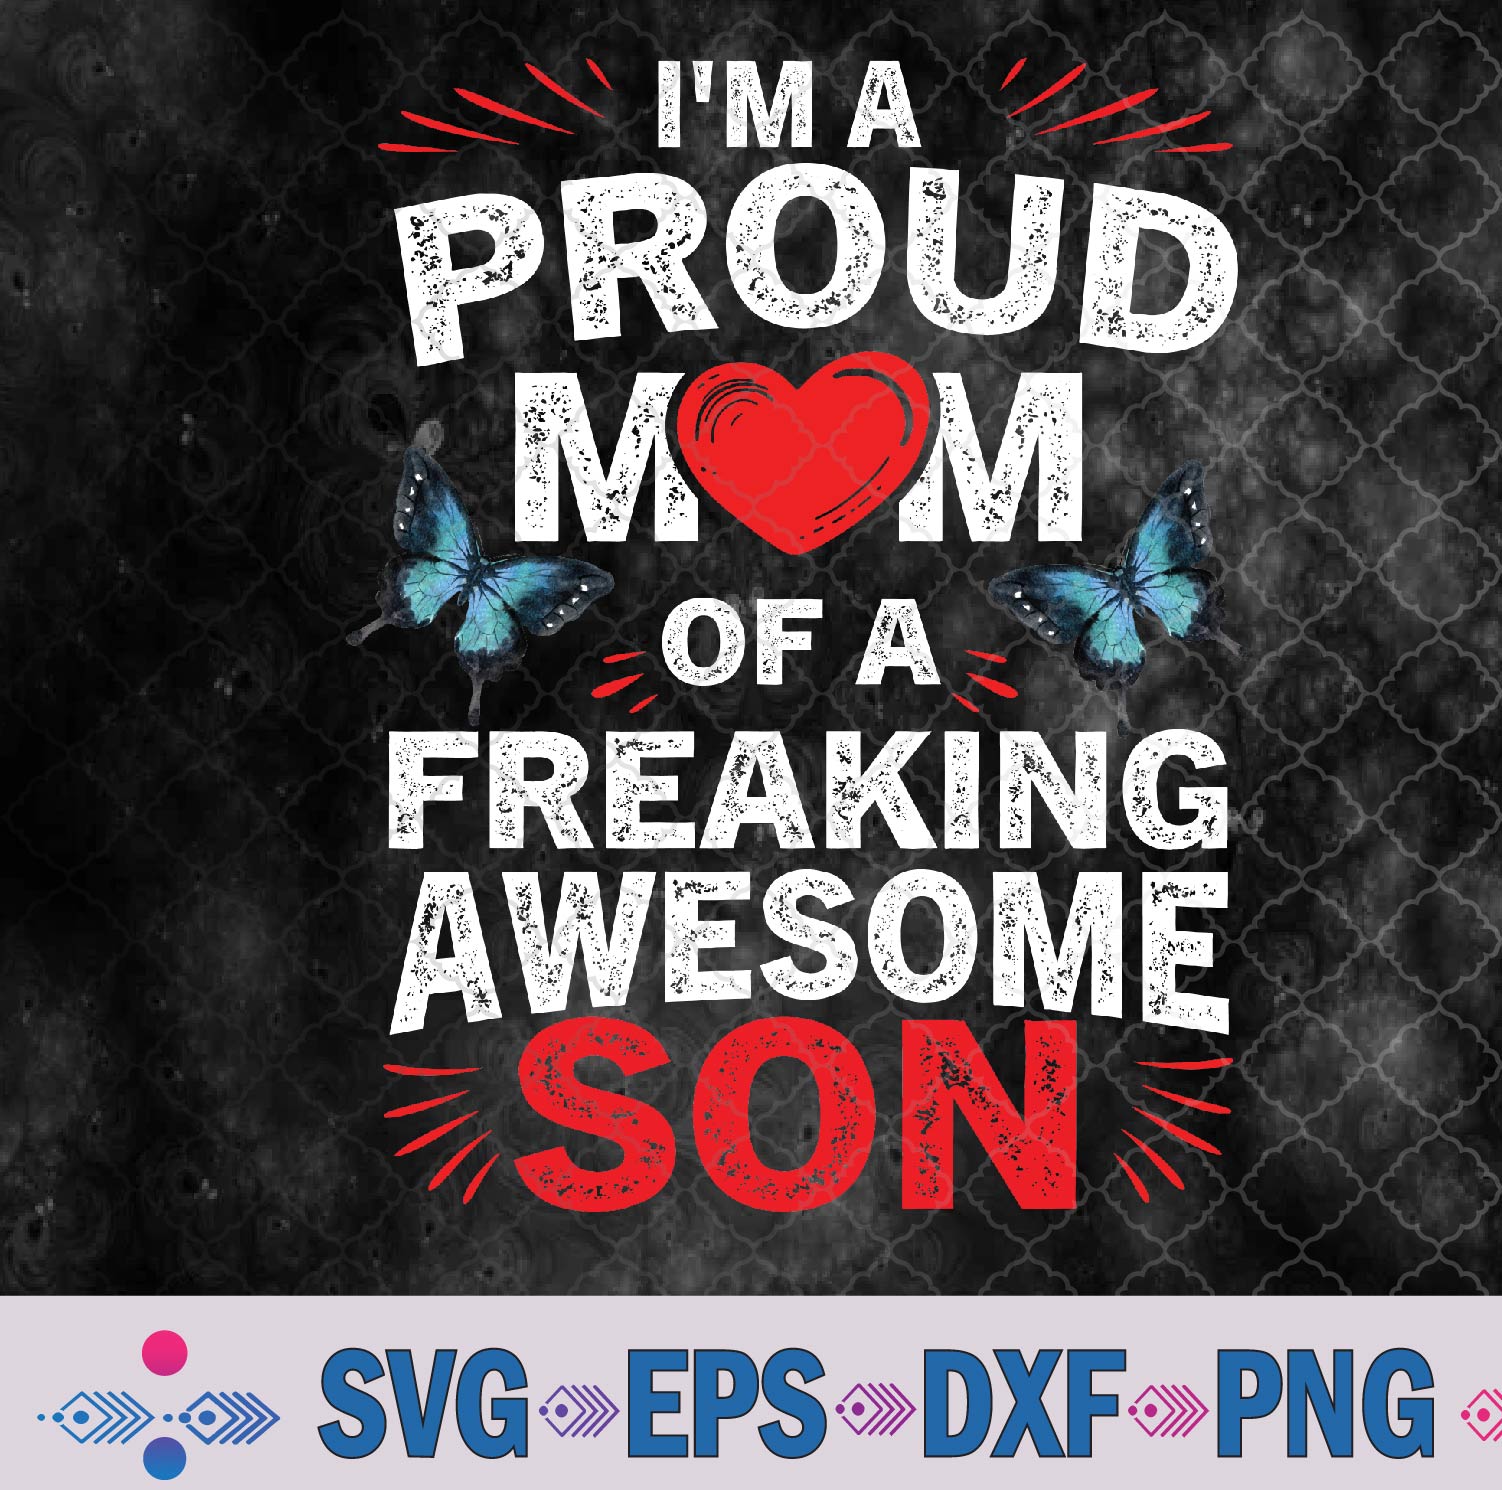 WTMNEW9file 09 7 I'm A Proud Mom Of A Freaking Awesome Son Mother's Day Cool Svg, Png, Digital Download